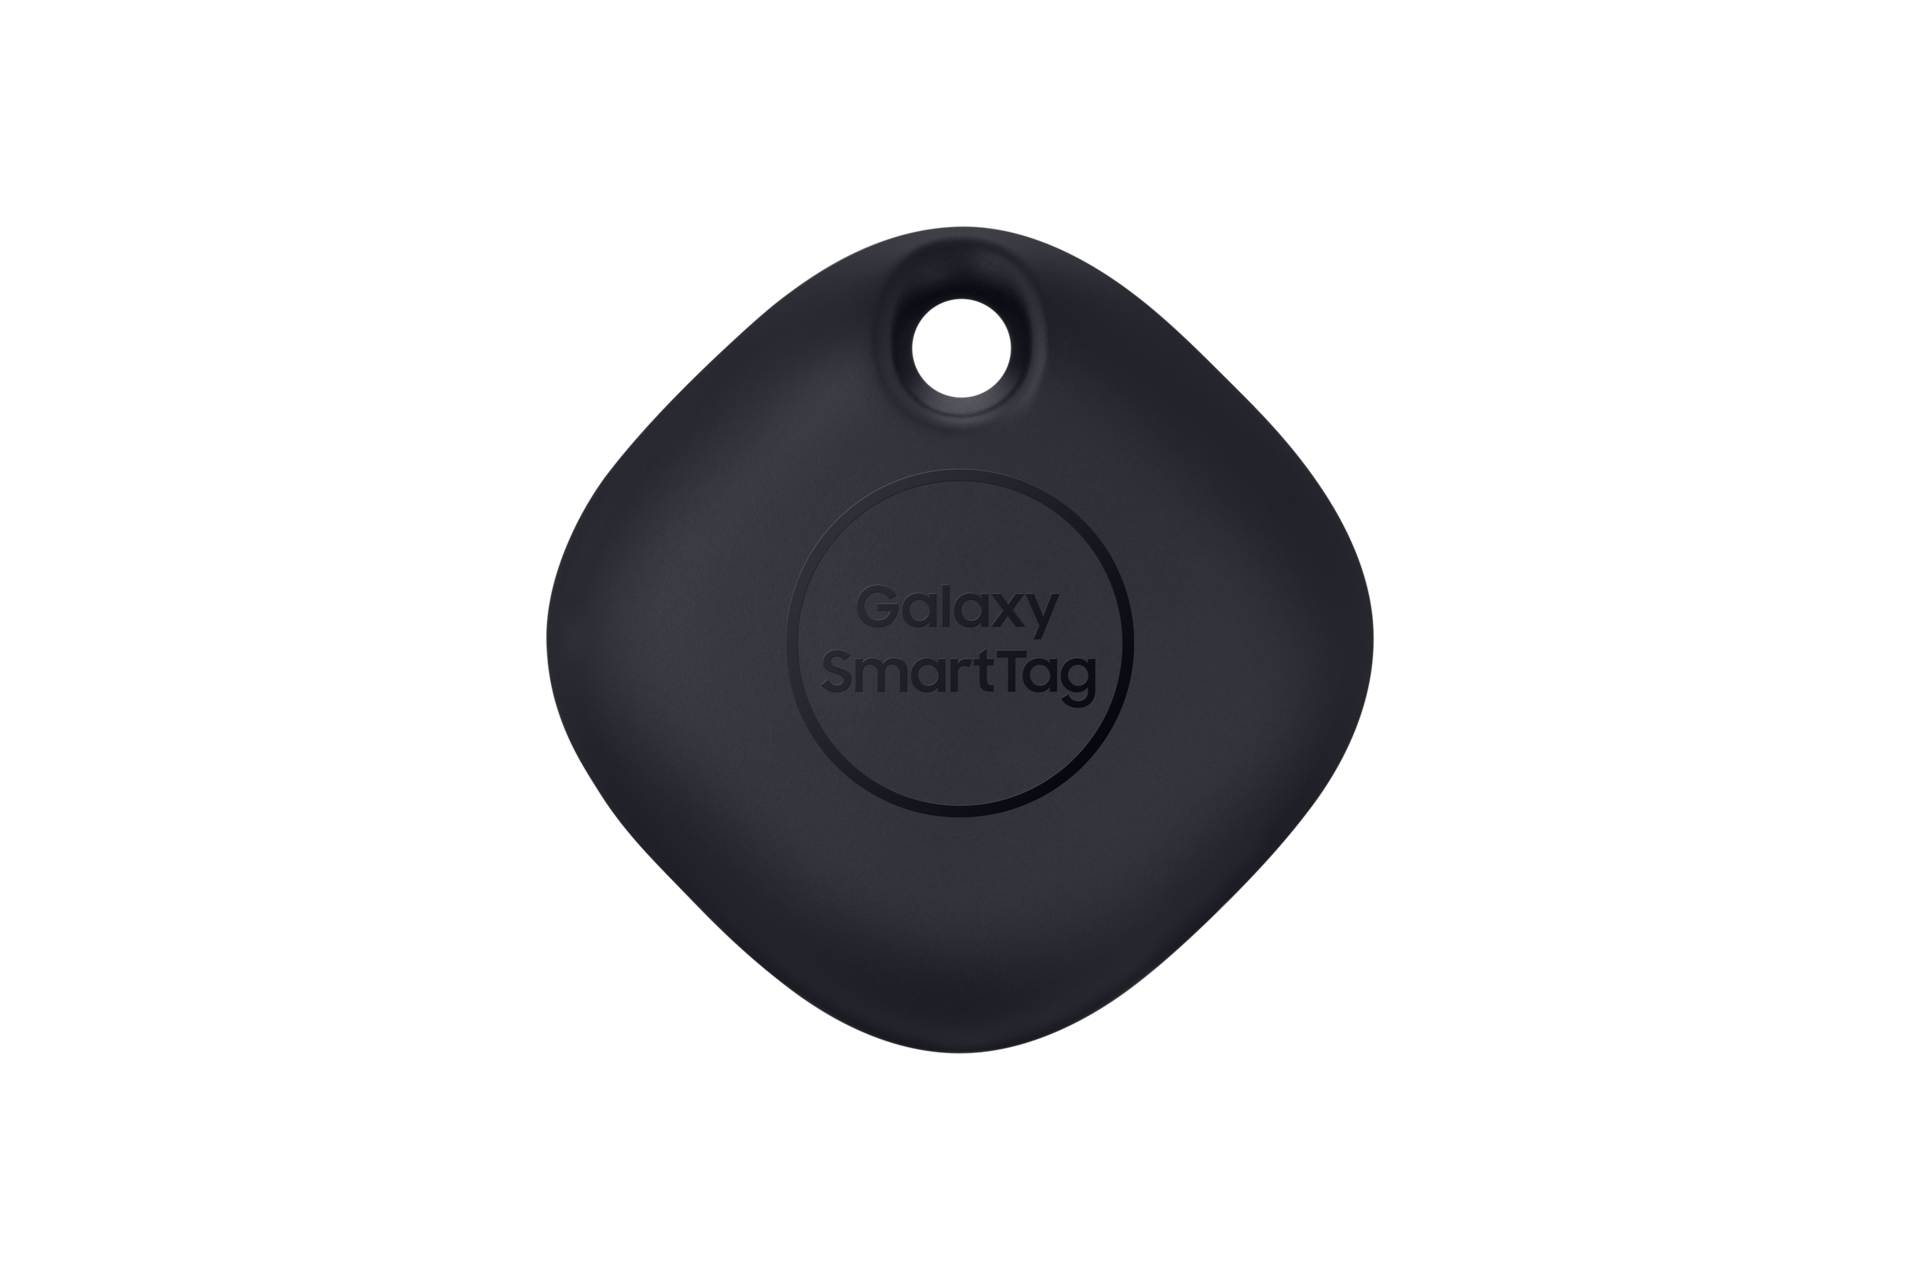 The front of a black Samsung Smart Tag helps control various IoT devices with just a click of a button. Learn more about Samsung Tag in Singapore